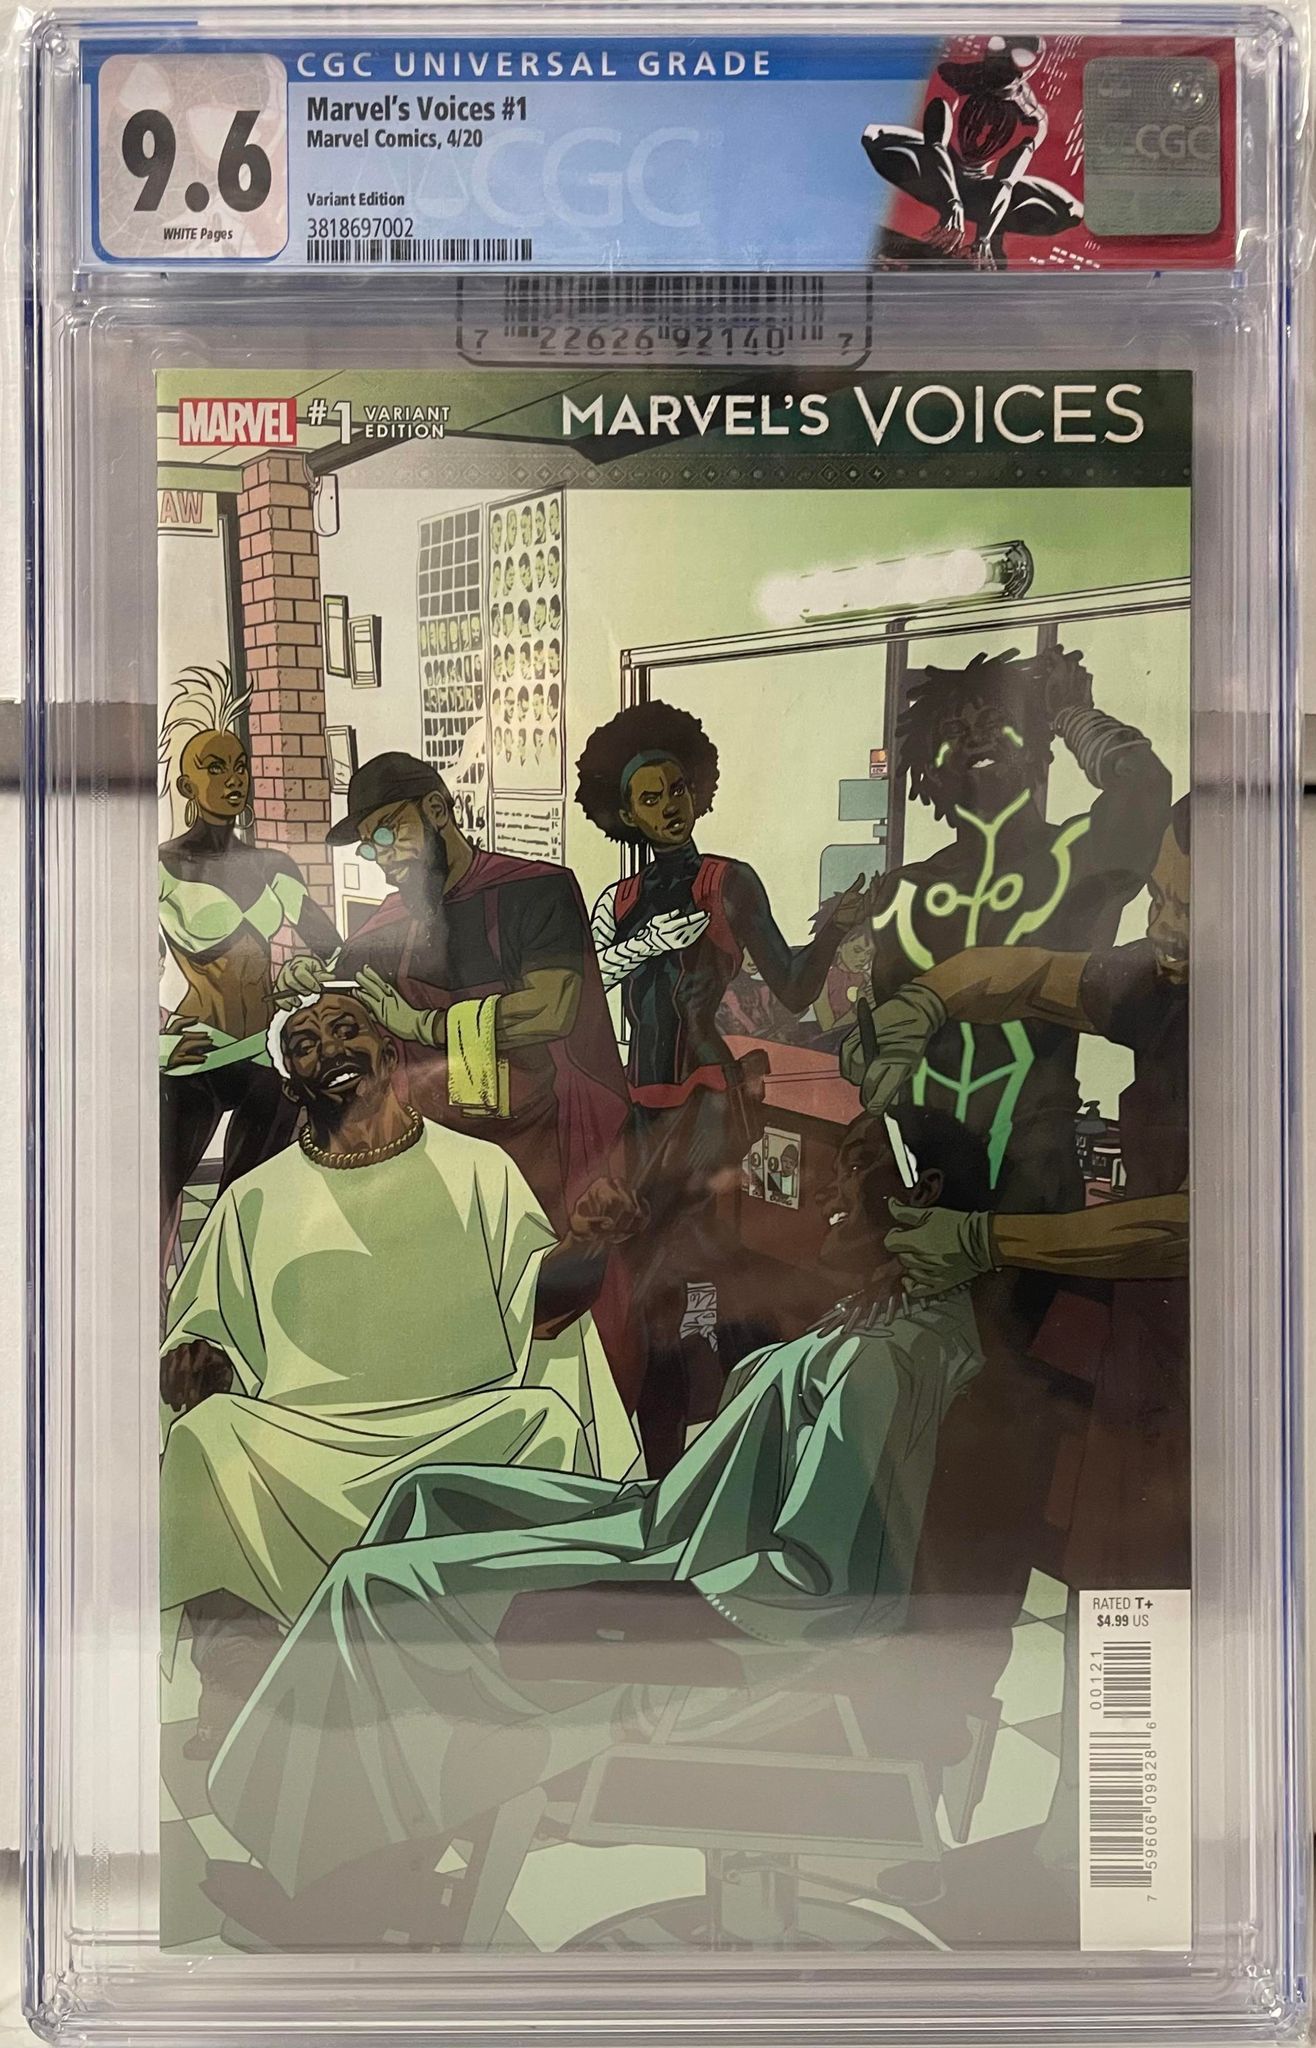 MARVEL VOICES #1 VARIANT EDITION CGC 9.6 W/RETIRED MILES MORALES CUSTOM LABEL, 1ST APPEARANCE OF GODDESS SPIDER